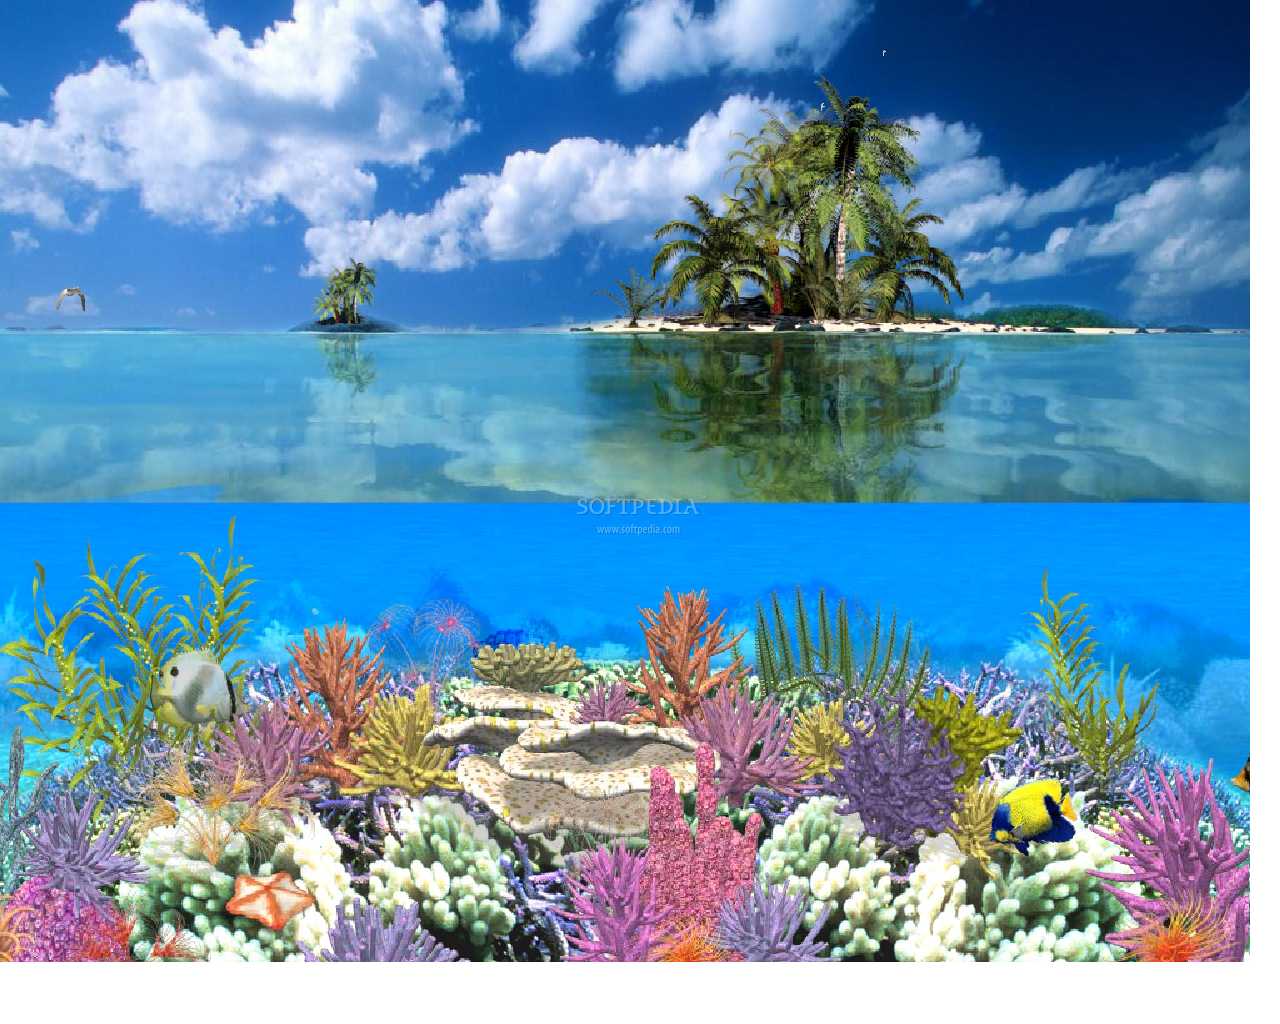 Coral Island Animated Wallpaper This Is The Image Displayed By